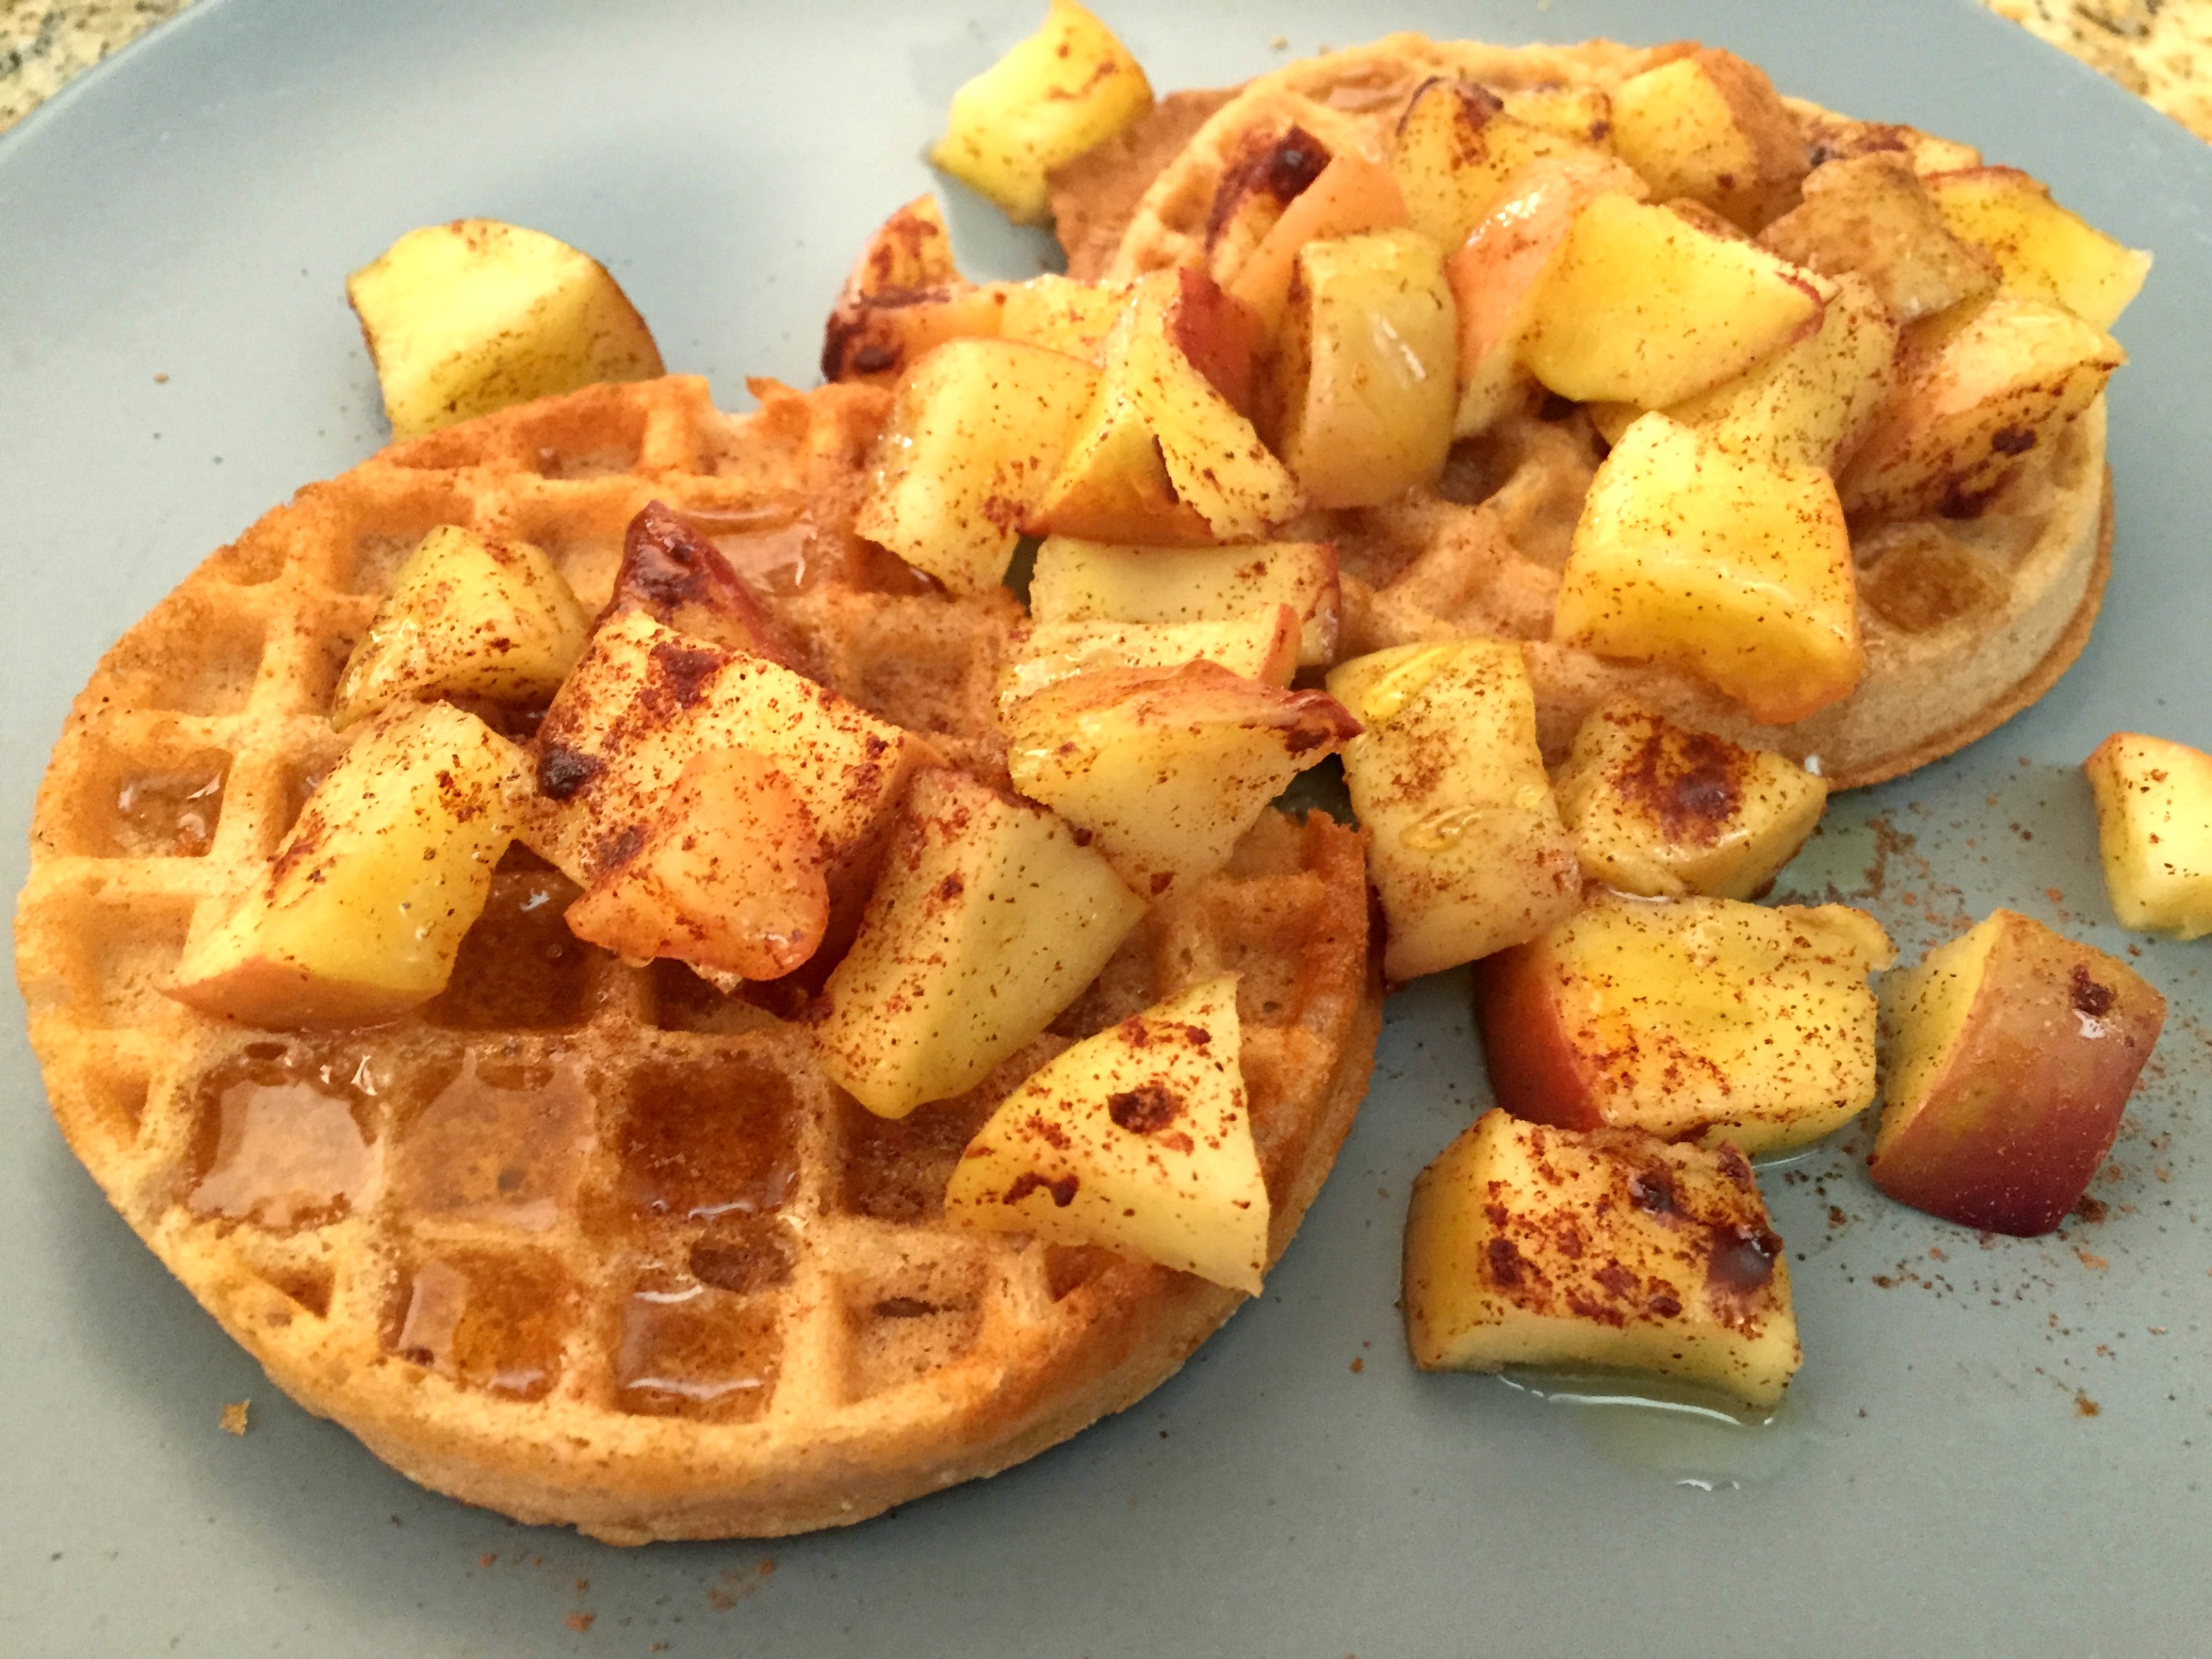 Vans waffles with baked apple